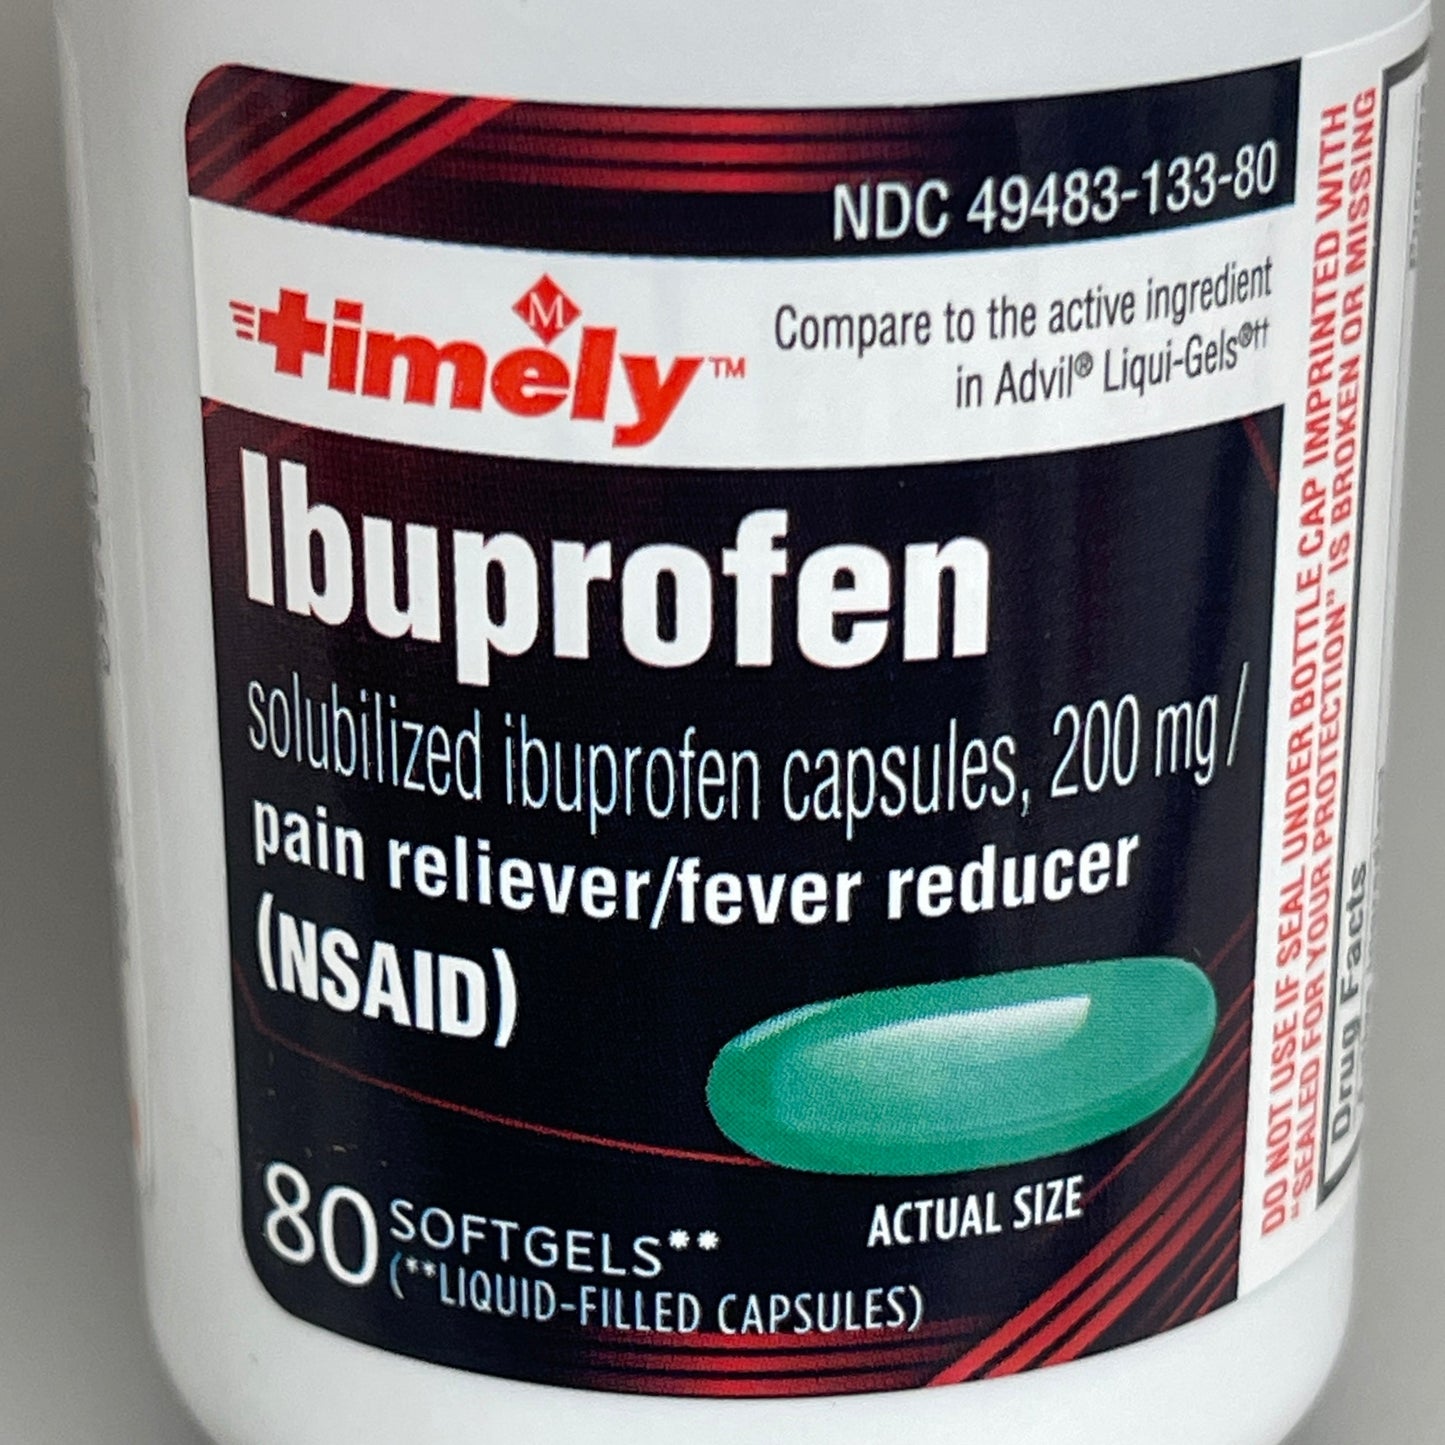 TIMELY Ibuprofen 6-PACK! 80 Softgels 200mg Pain Reliever/Fever Reducer BB 05/24 (New)